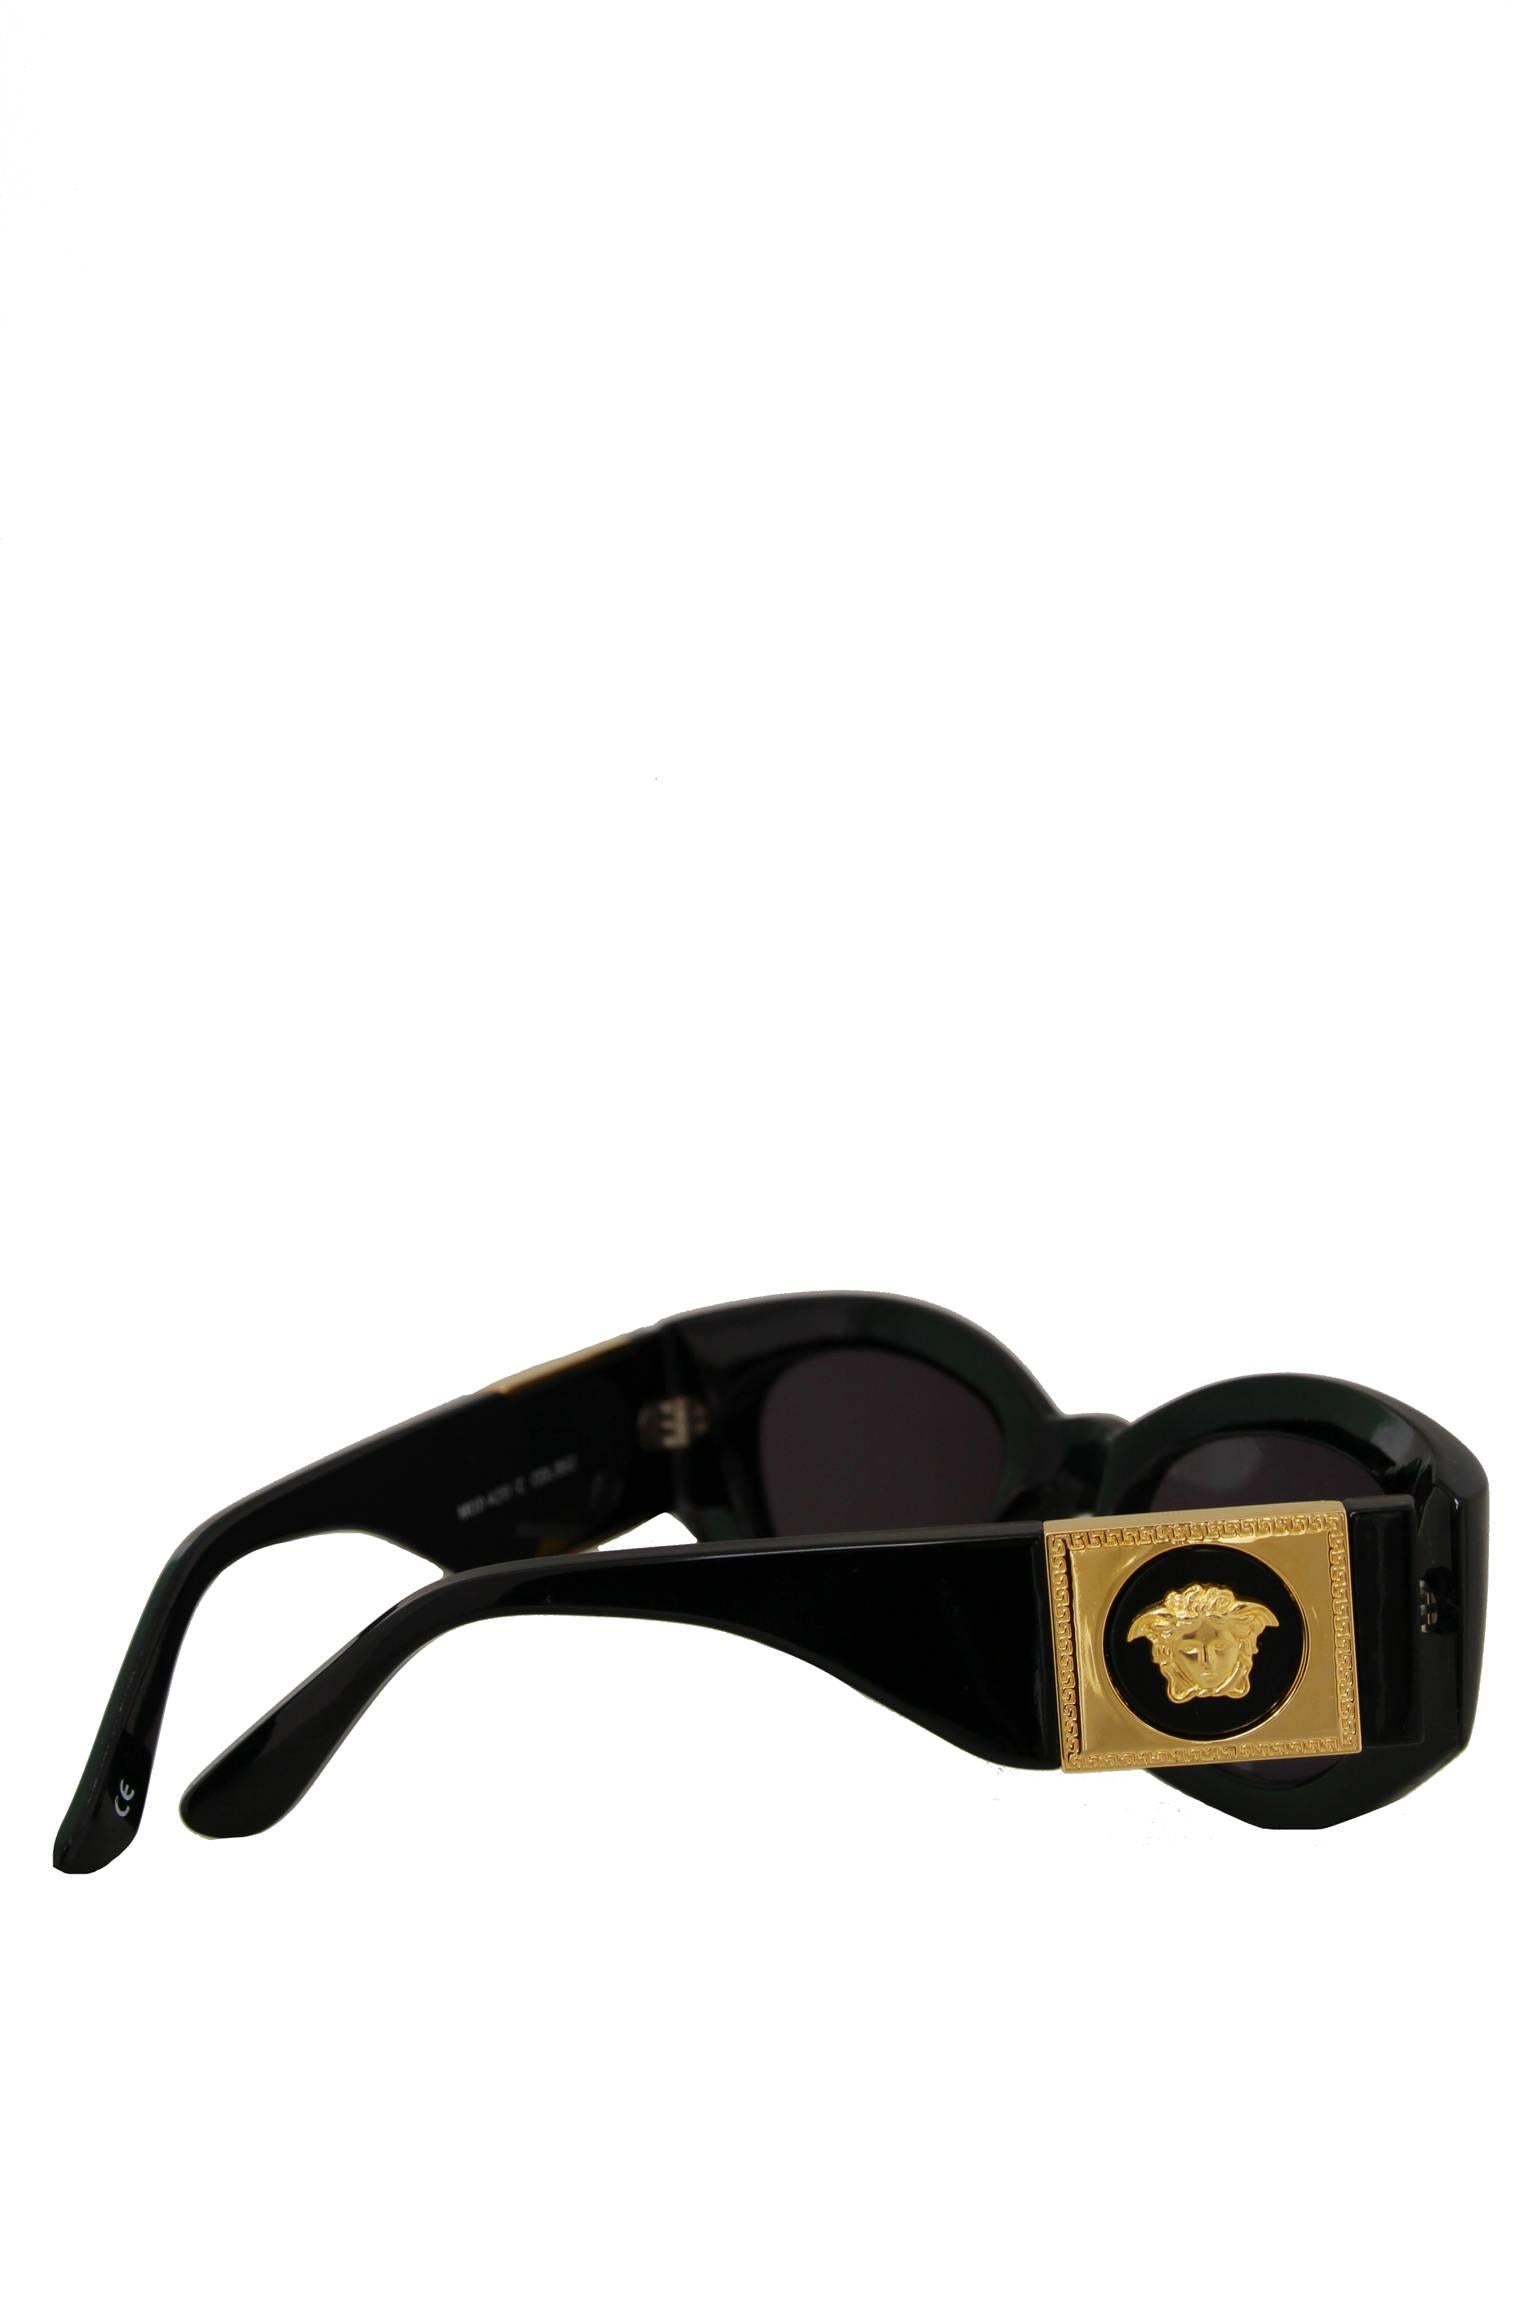 Women's or Men's A Pair of 1990s Gianni Versace Black Frame Sunglasses W. Gold Colored Medusa